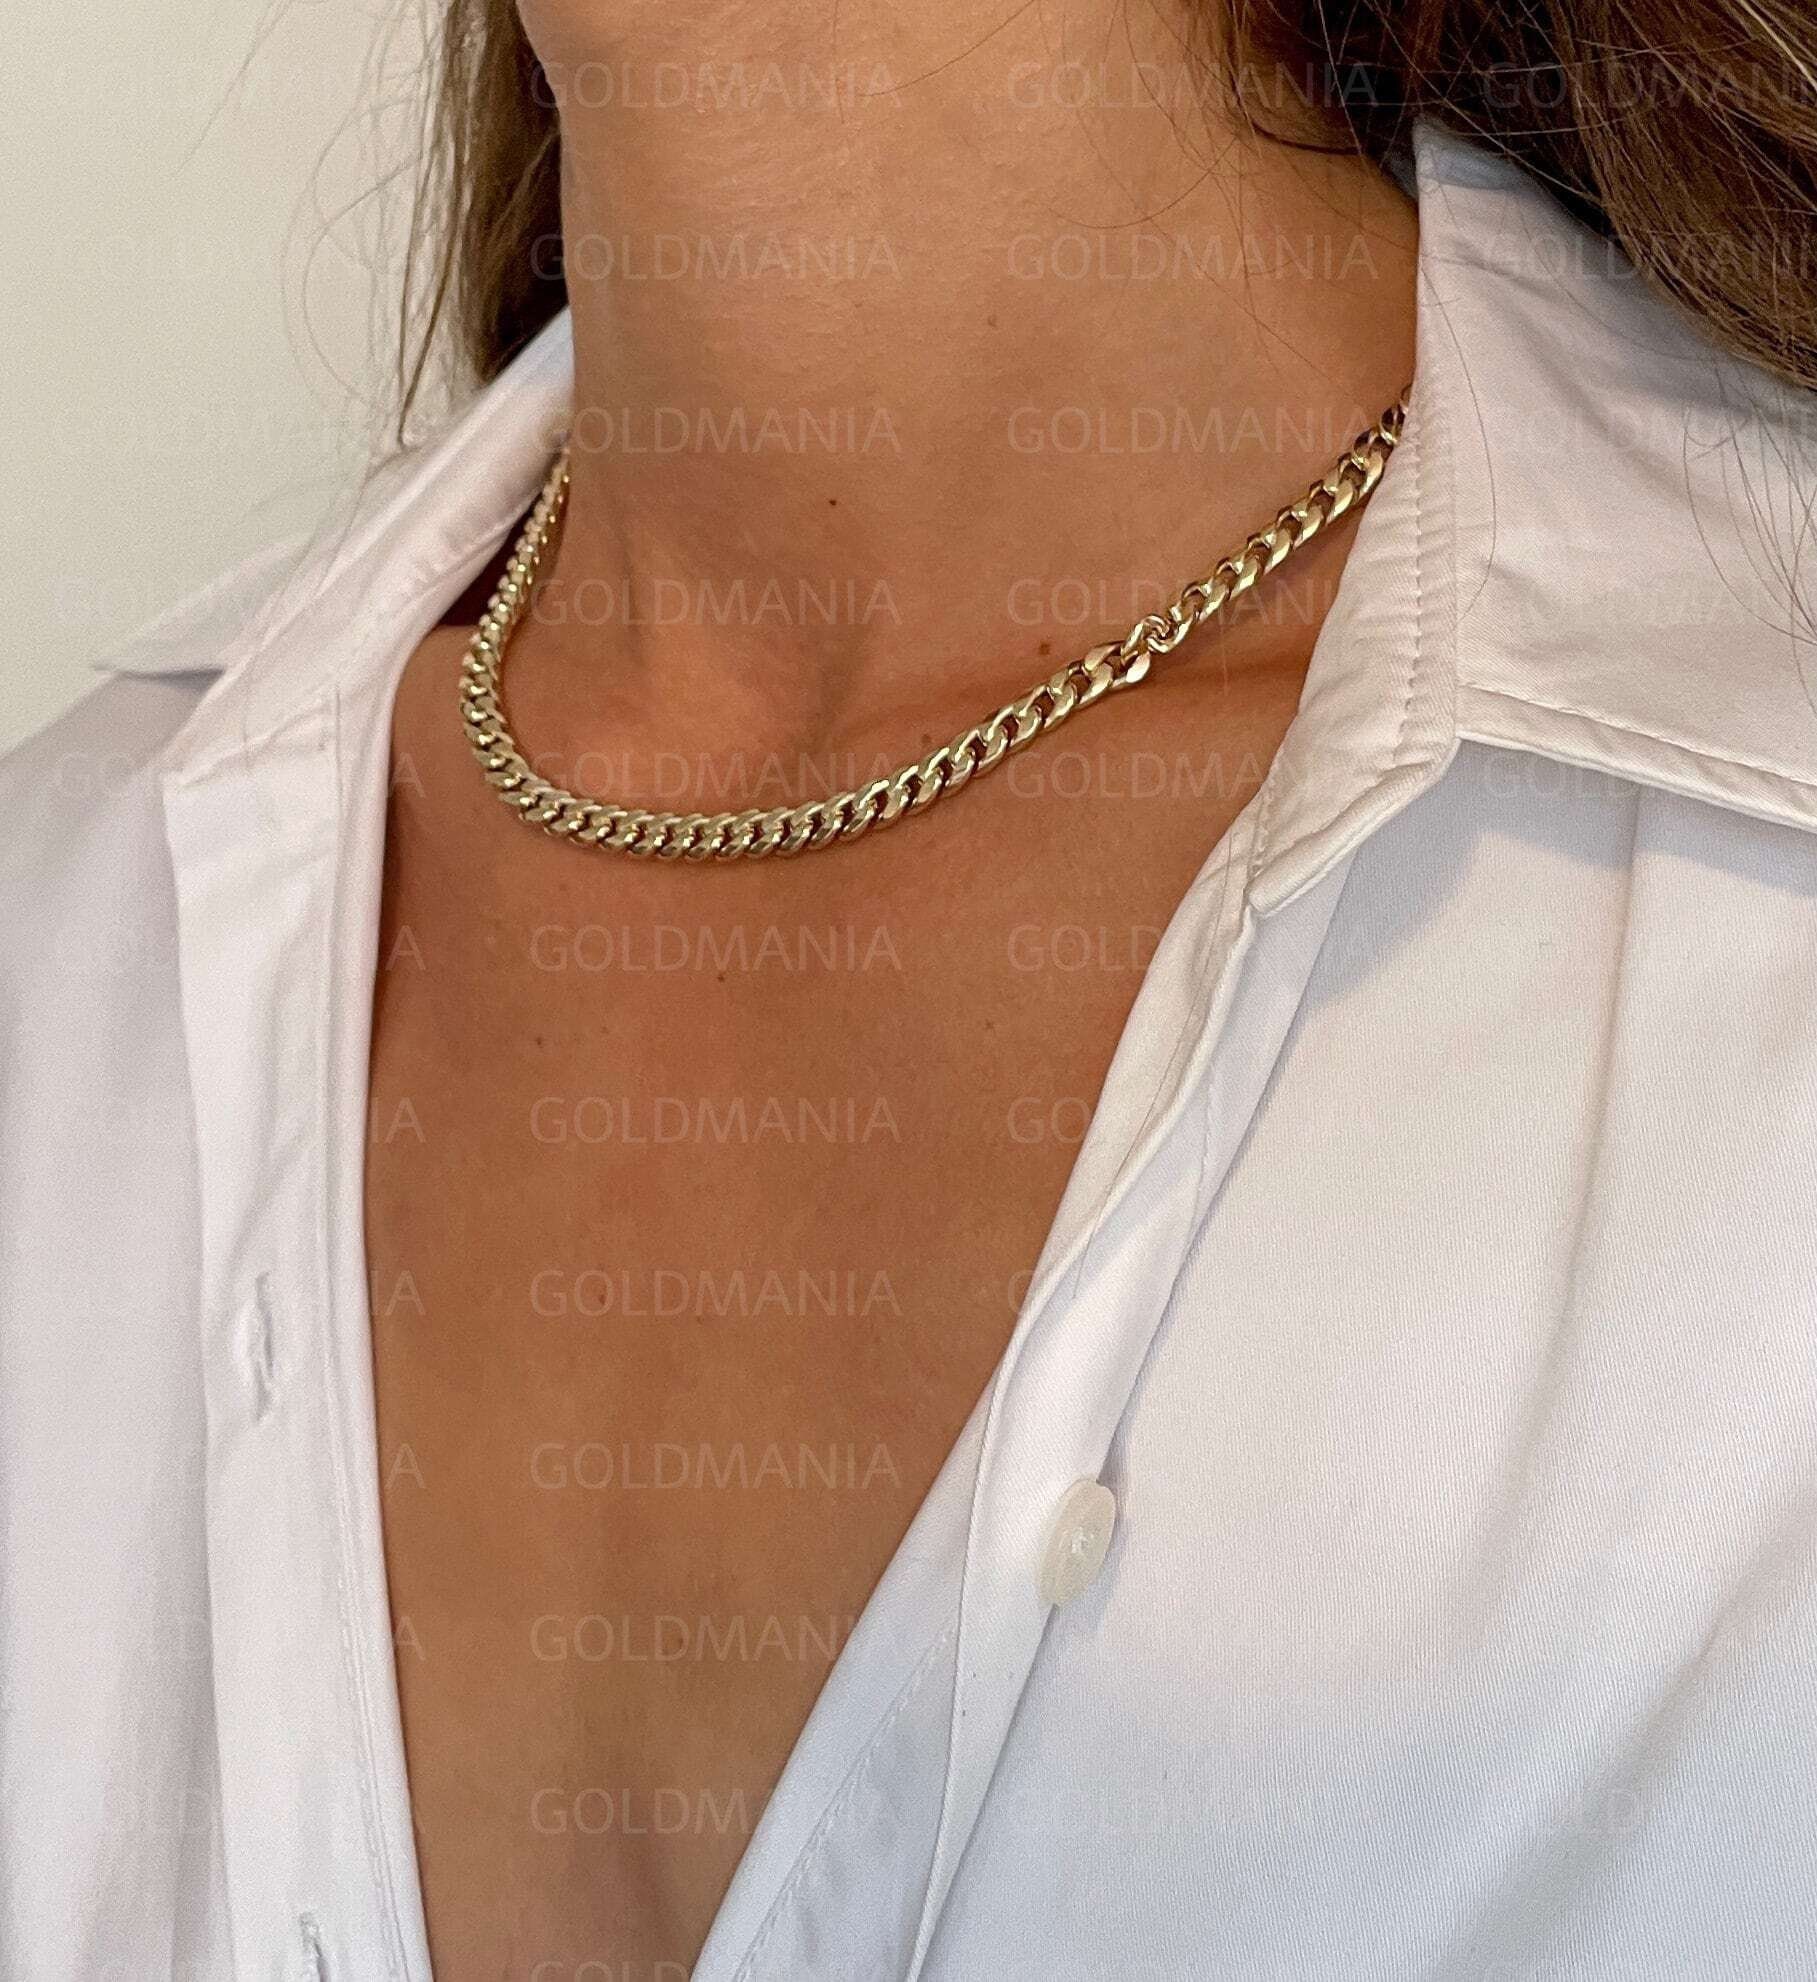 Cuban Link Chain - Small Gold Cuban Chain 14K Yellow Gold / 16in by Helen Ficalora